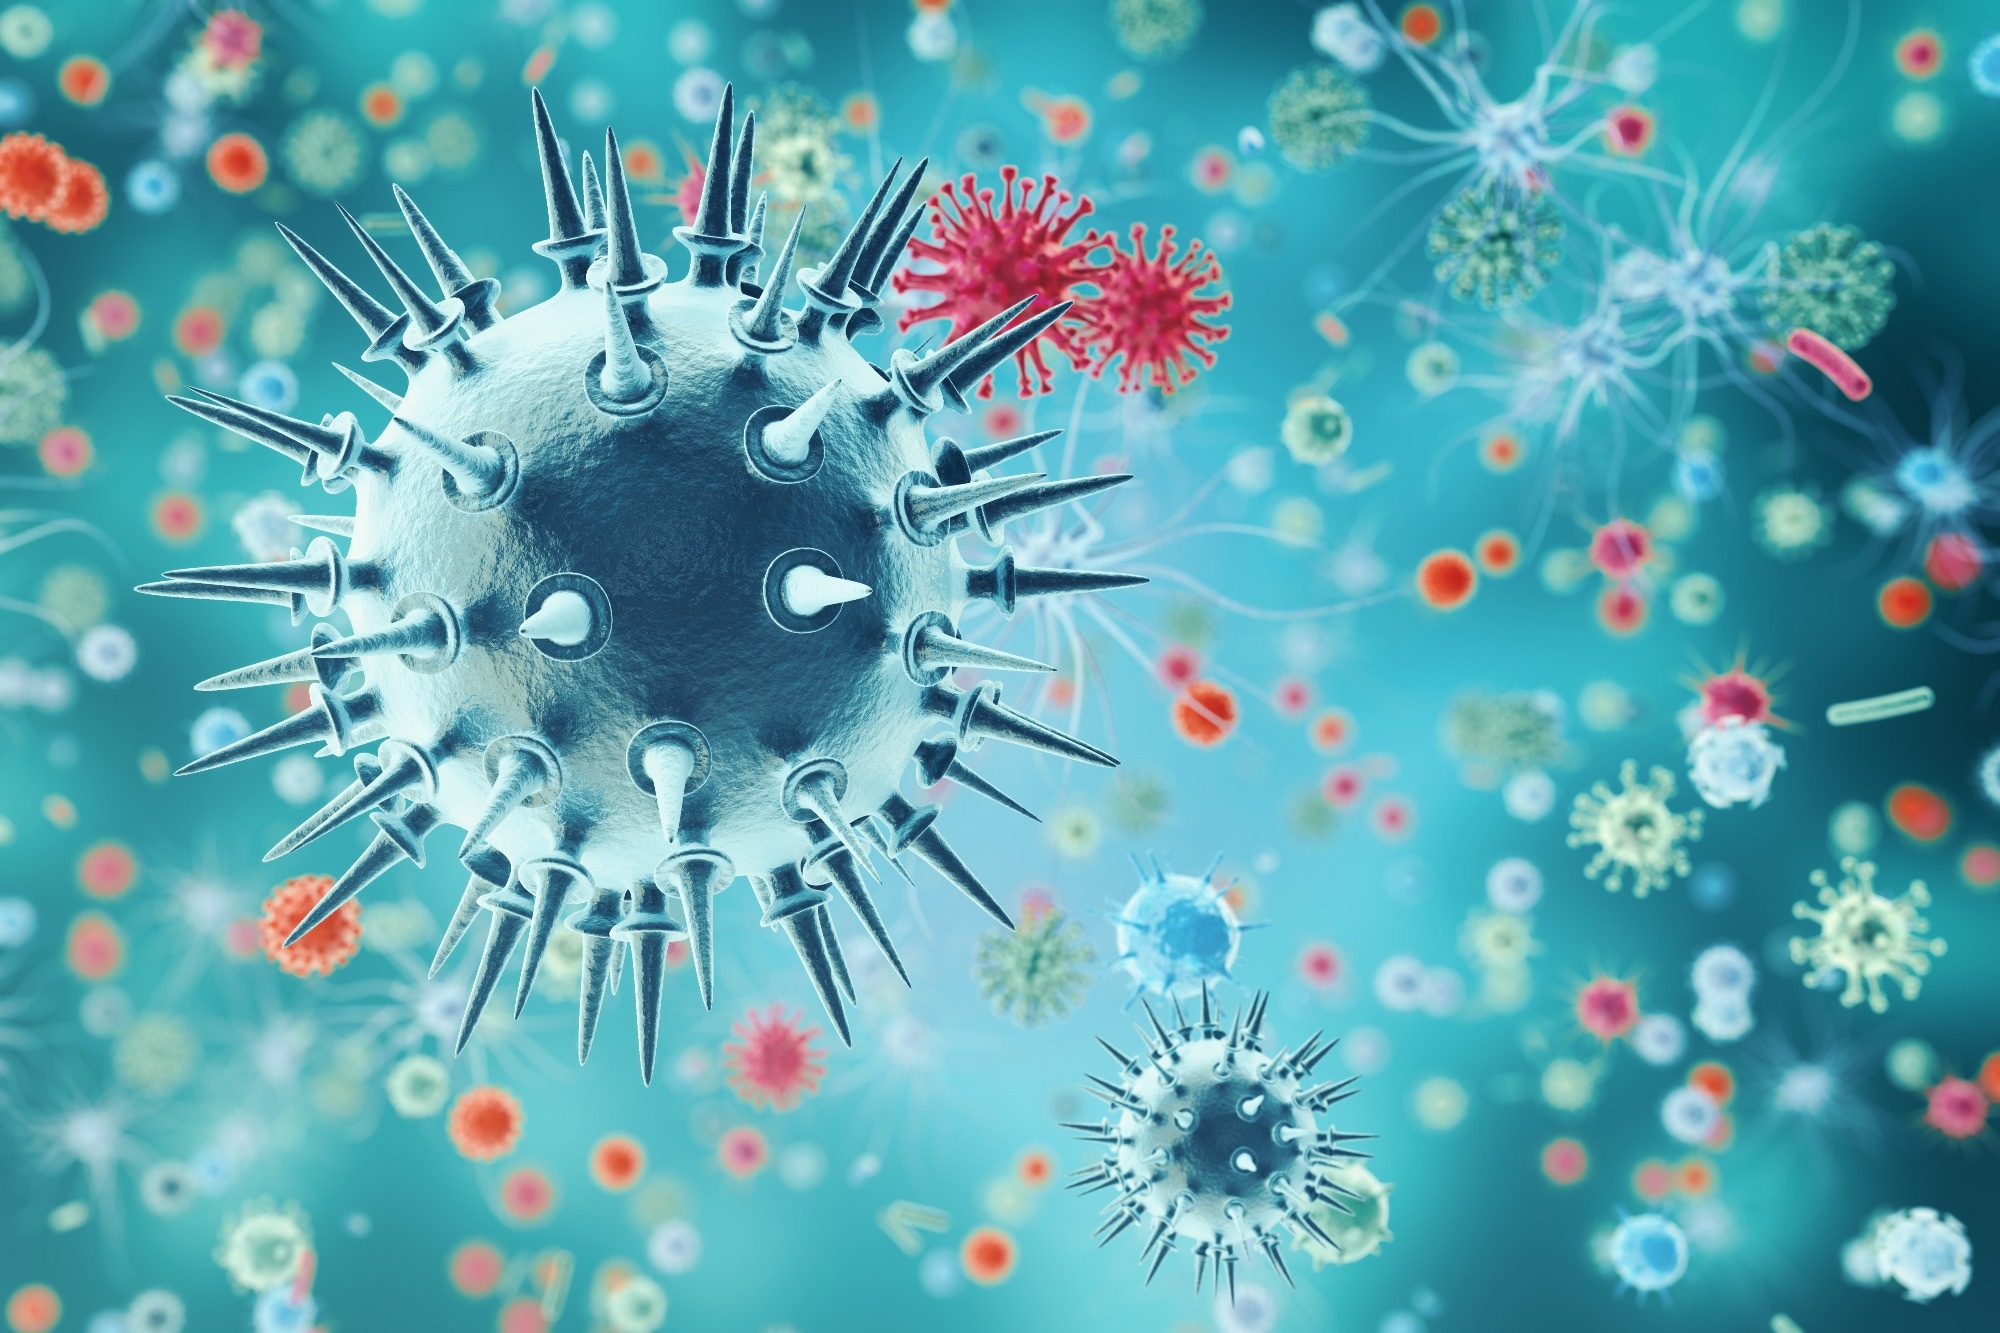 Study: Molecular docking used as an advanced tool to determine novel compounds on emerging infectious diseases: A systematic review. Image Credit: Rost9/Shutterstock